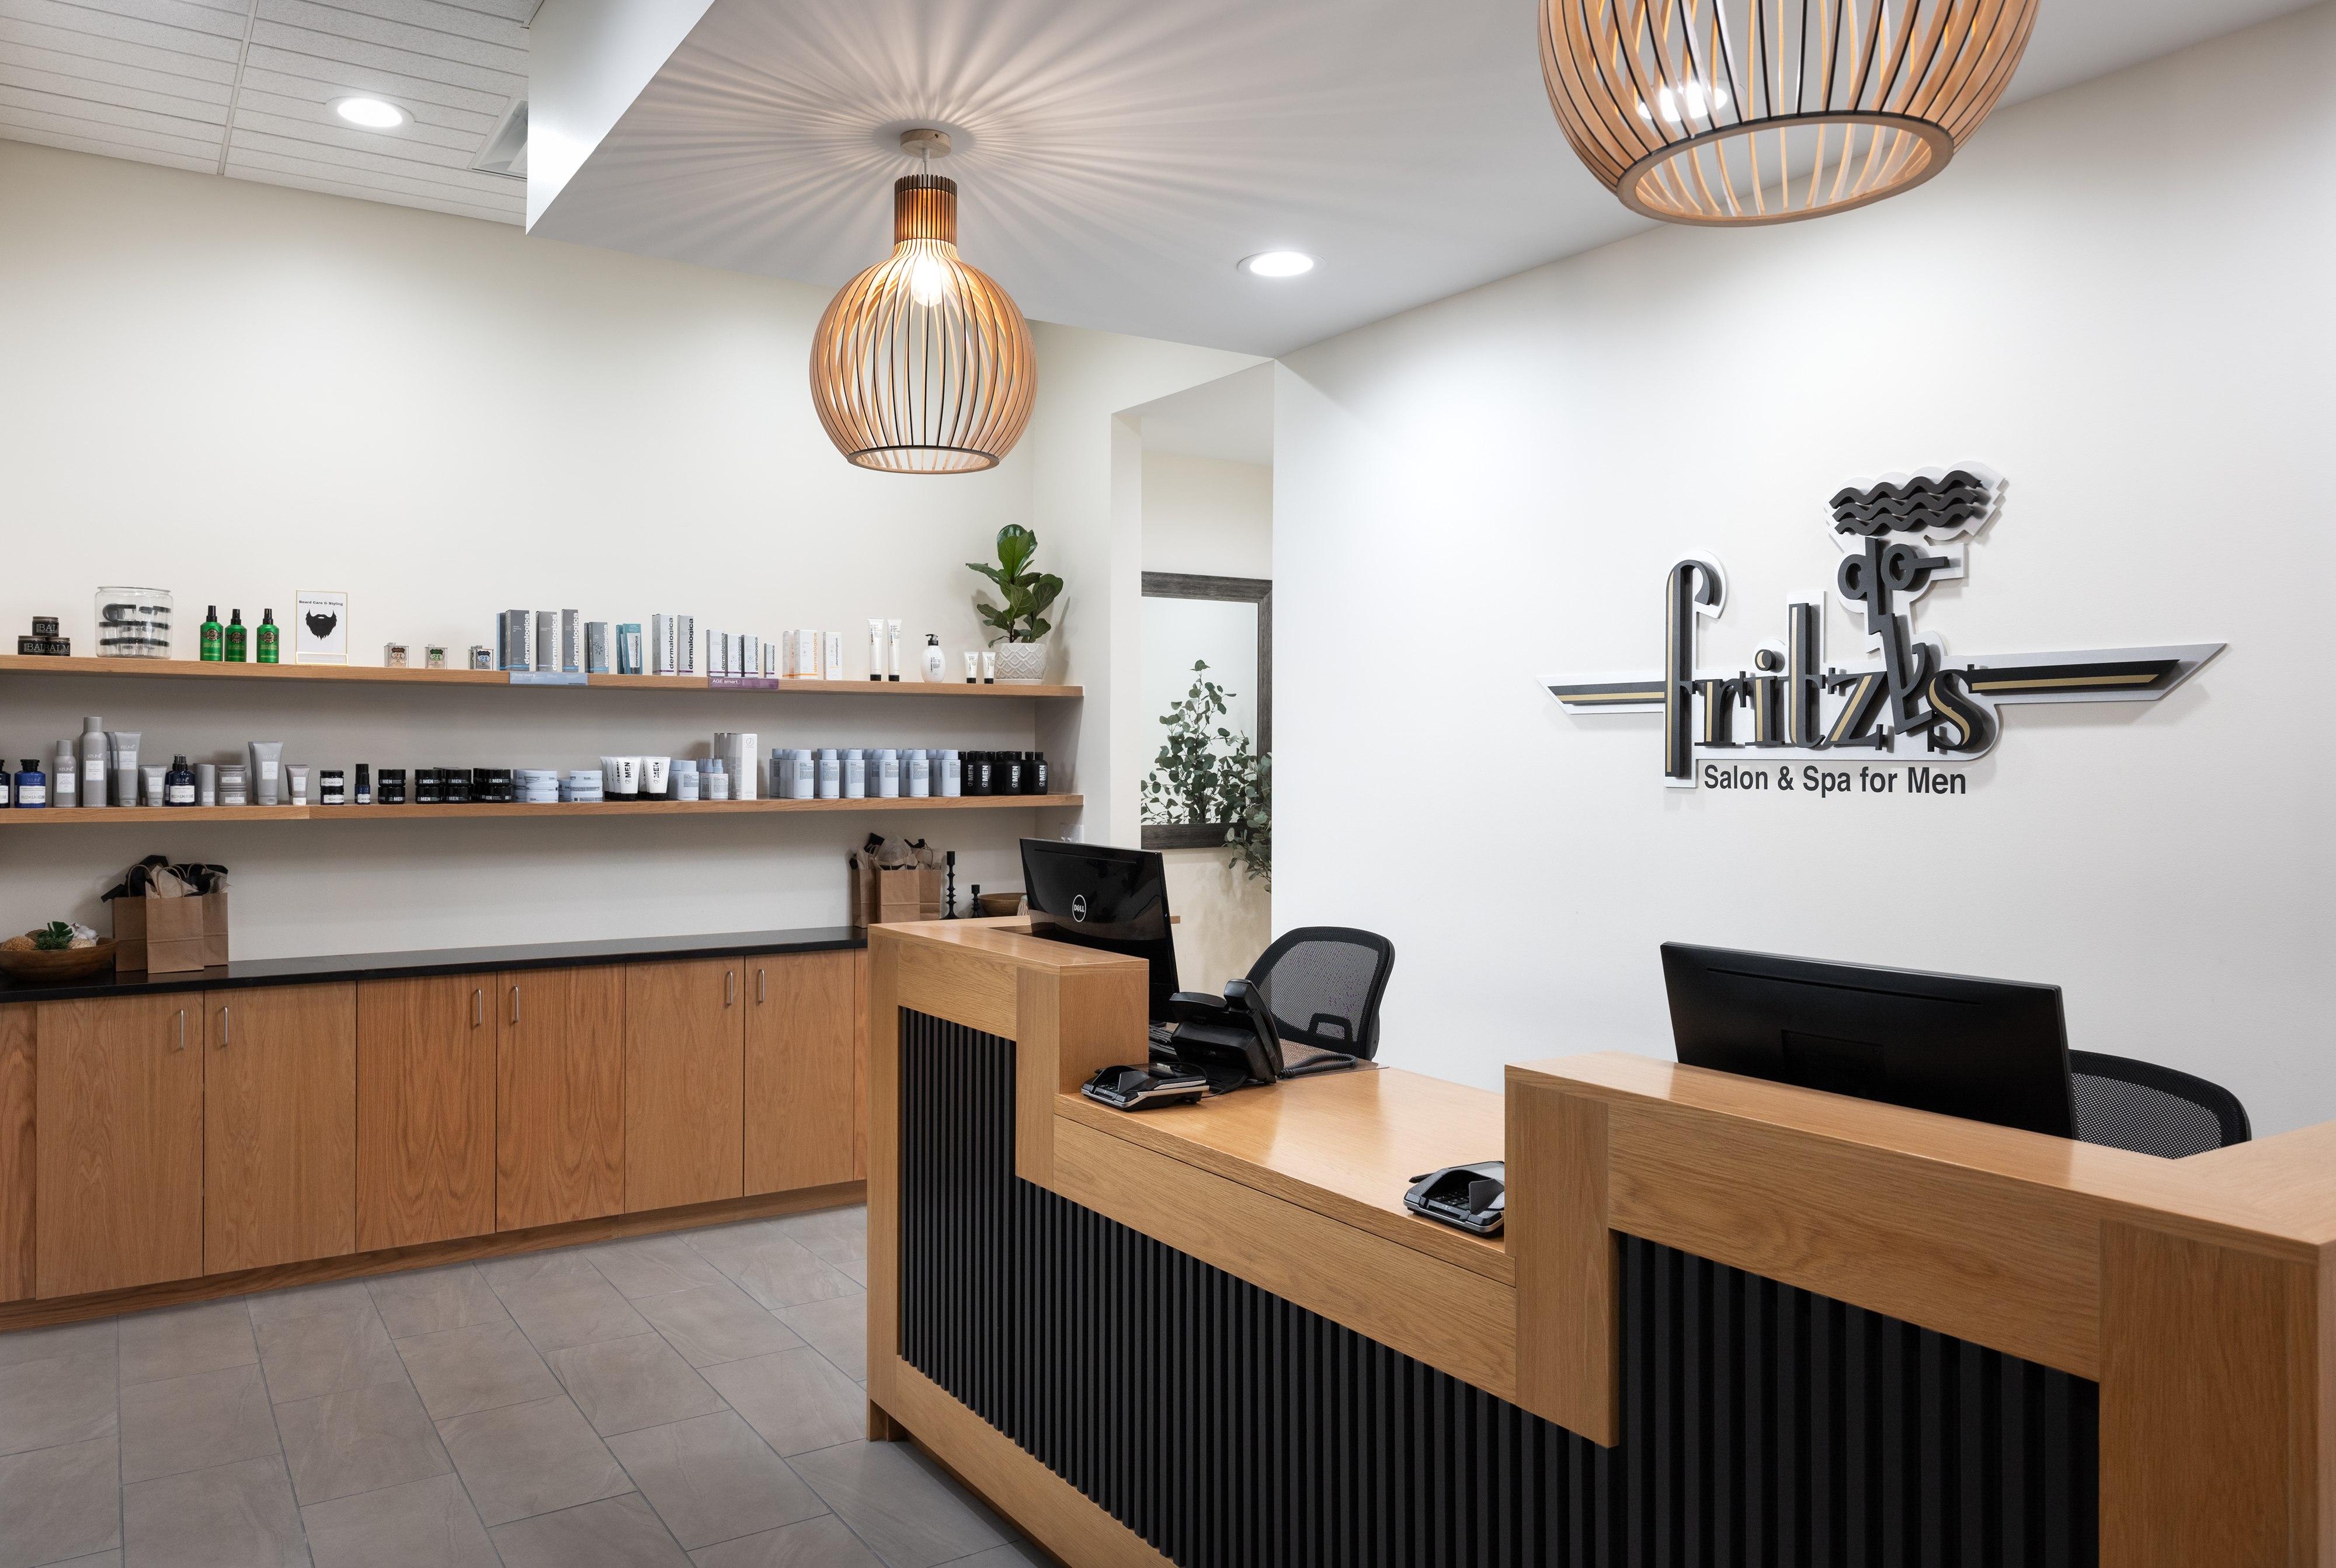 Fritz's Salon and Spa